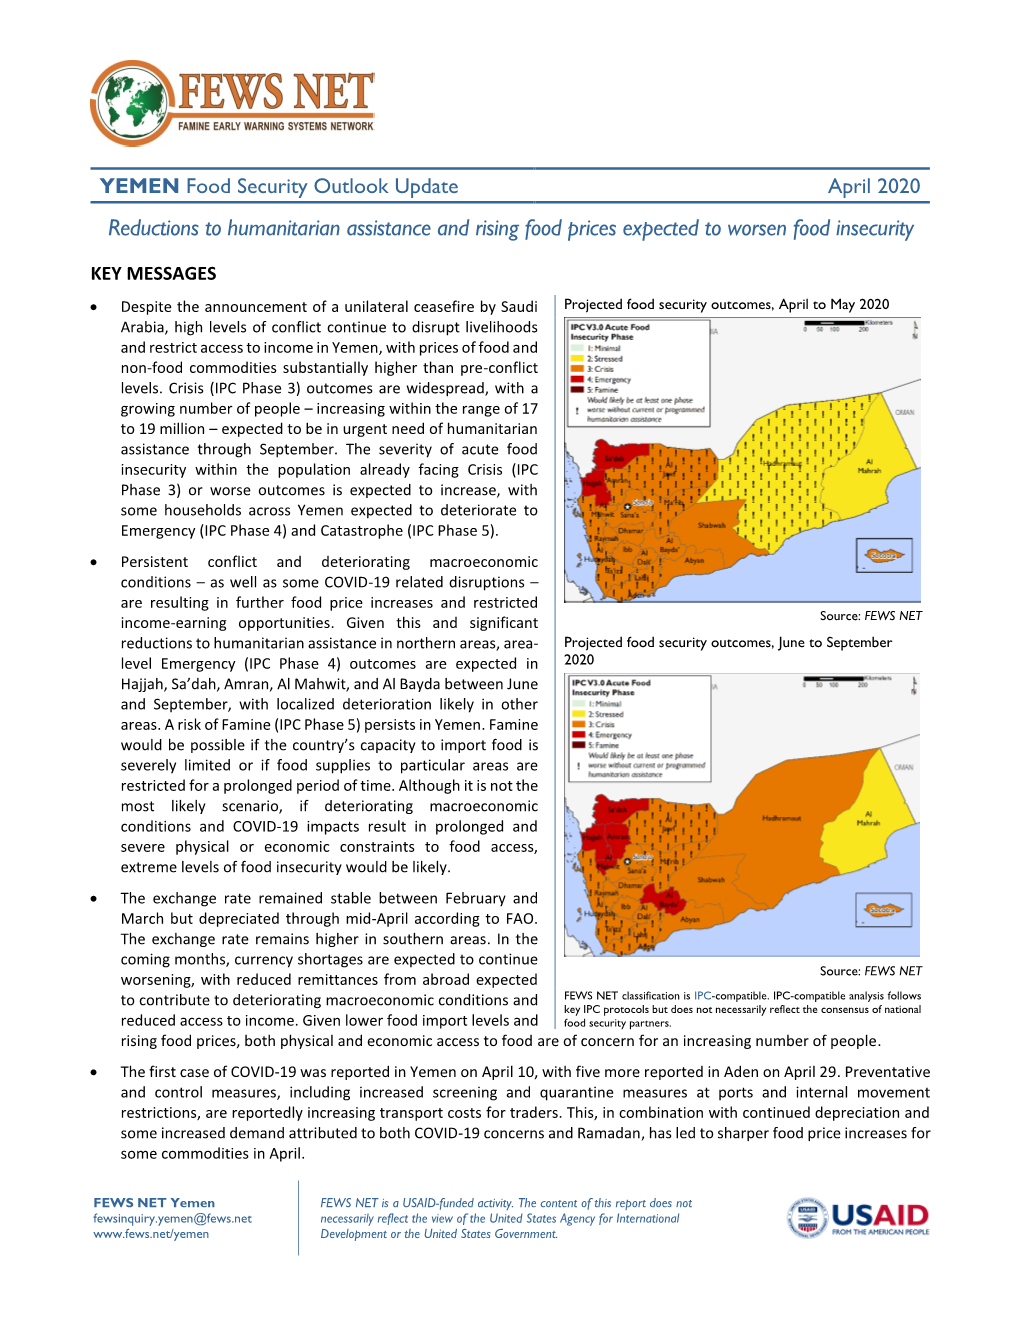 YEMEN Food Security Outlook Update April 2020 Reductions to Humanitarian Assistance and Rising Food Prices Expected to Worsen Food Insecurity